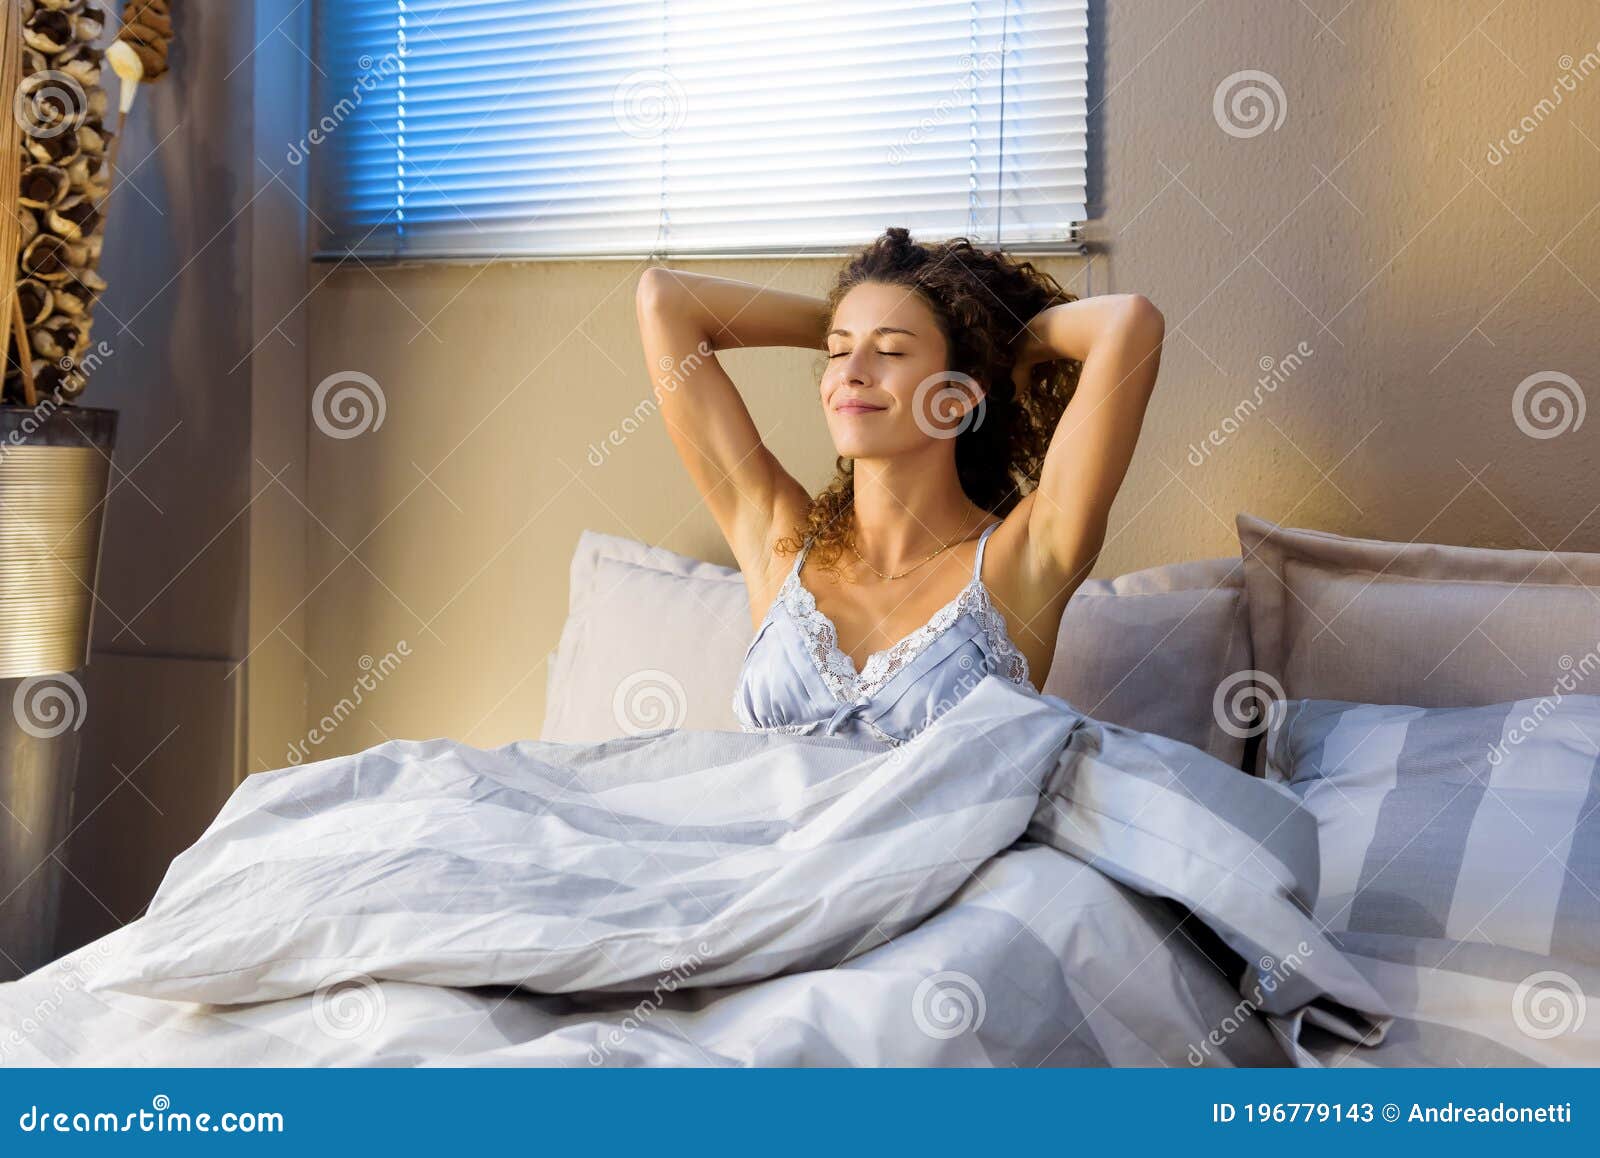 happy refreshed young woman waking from a sleep